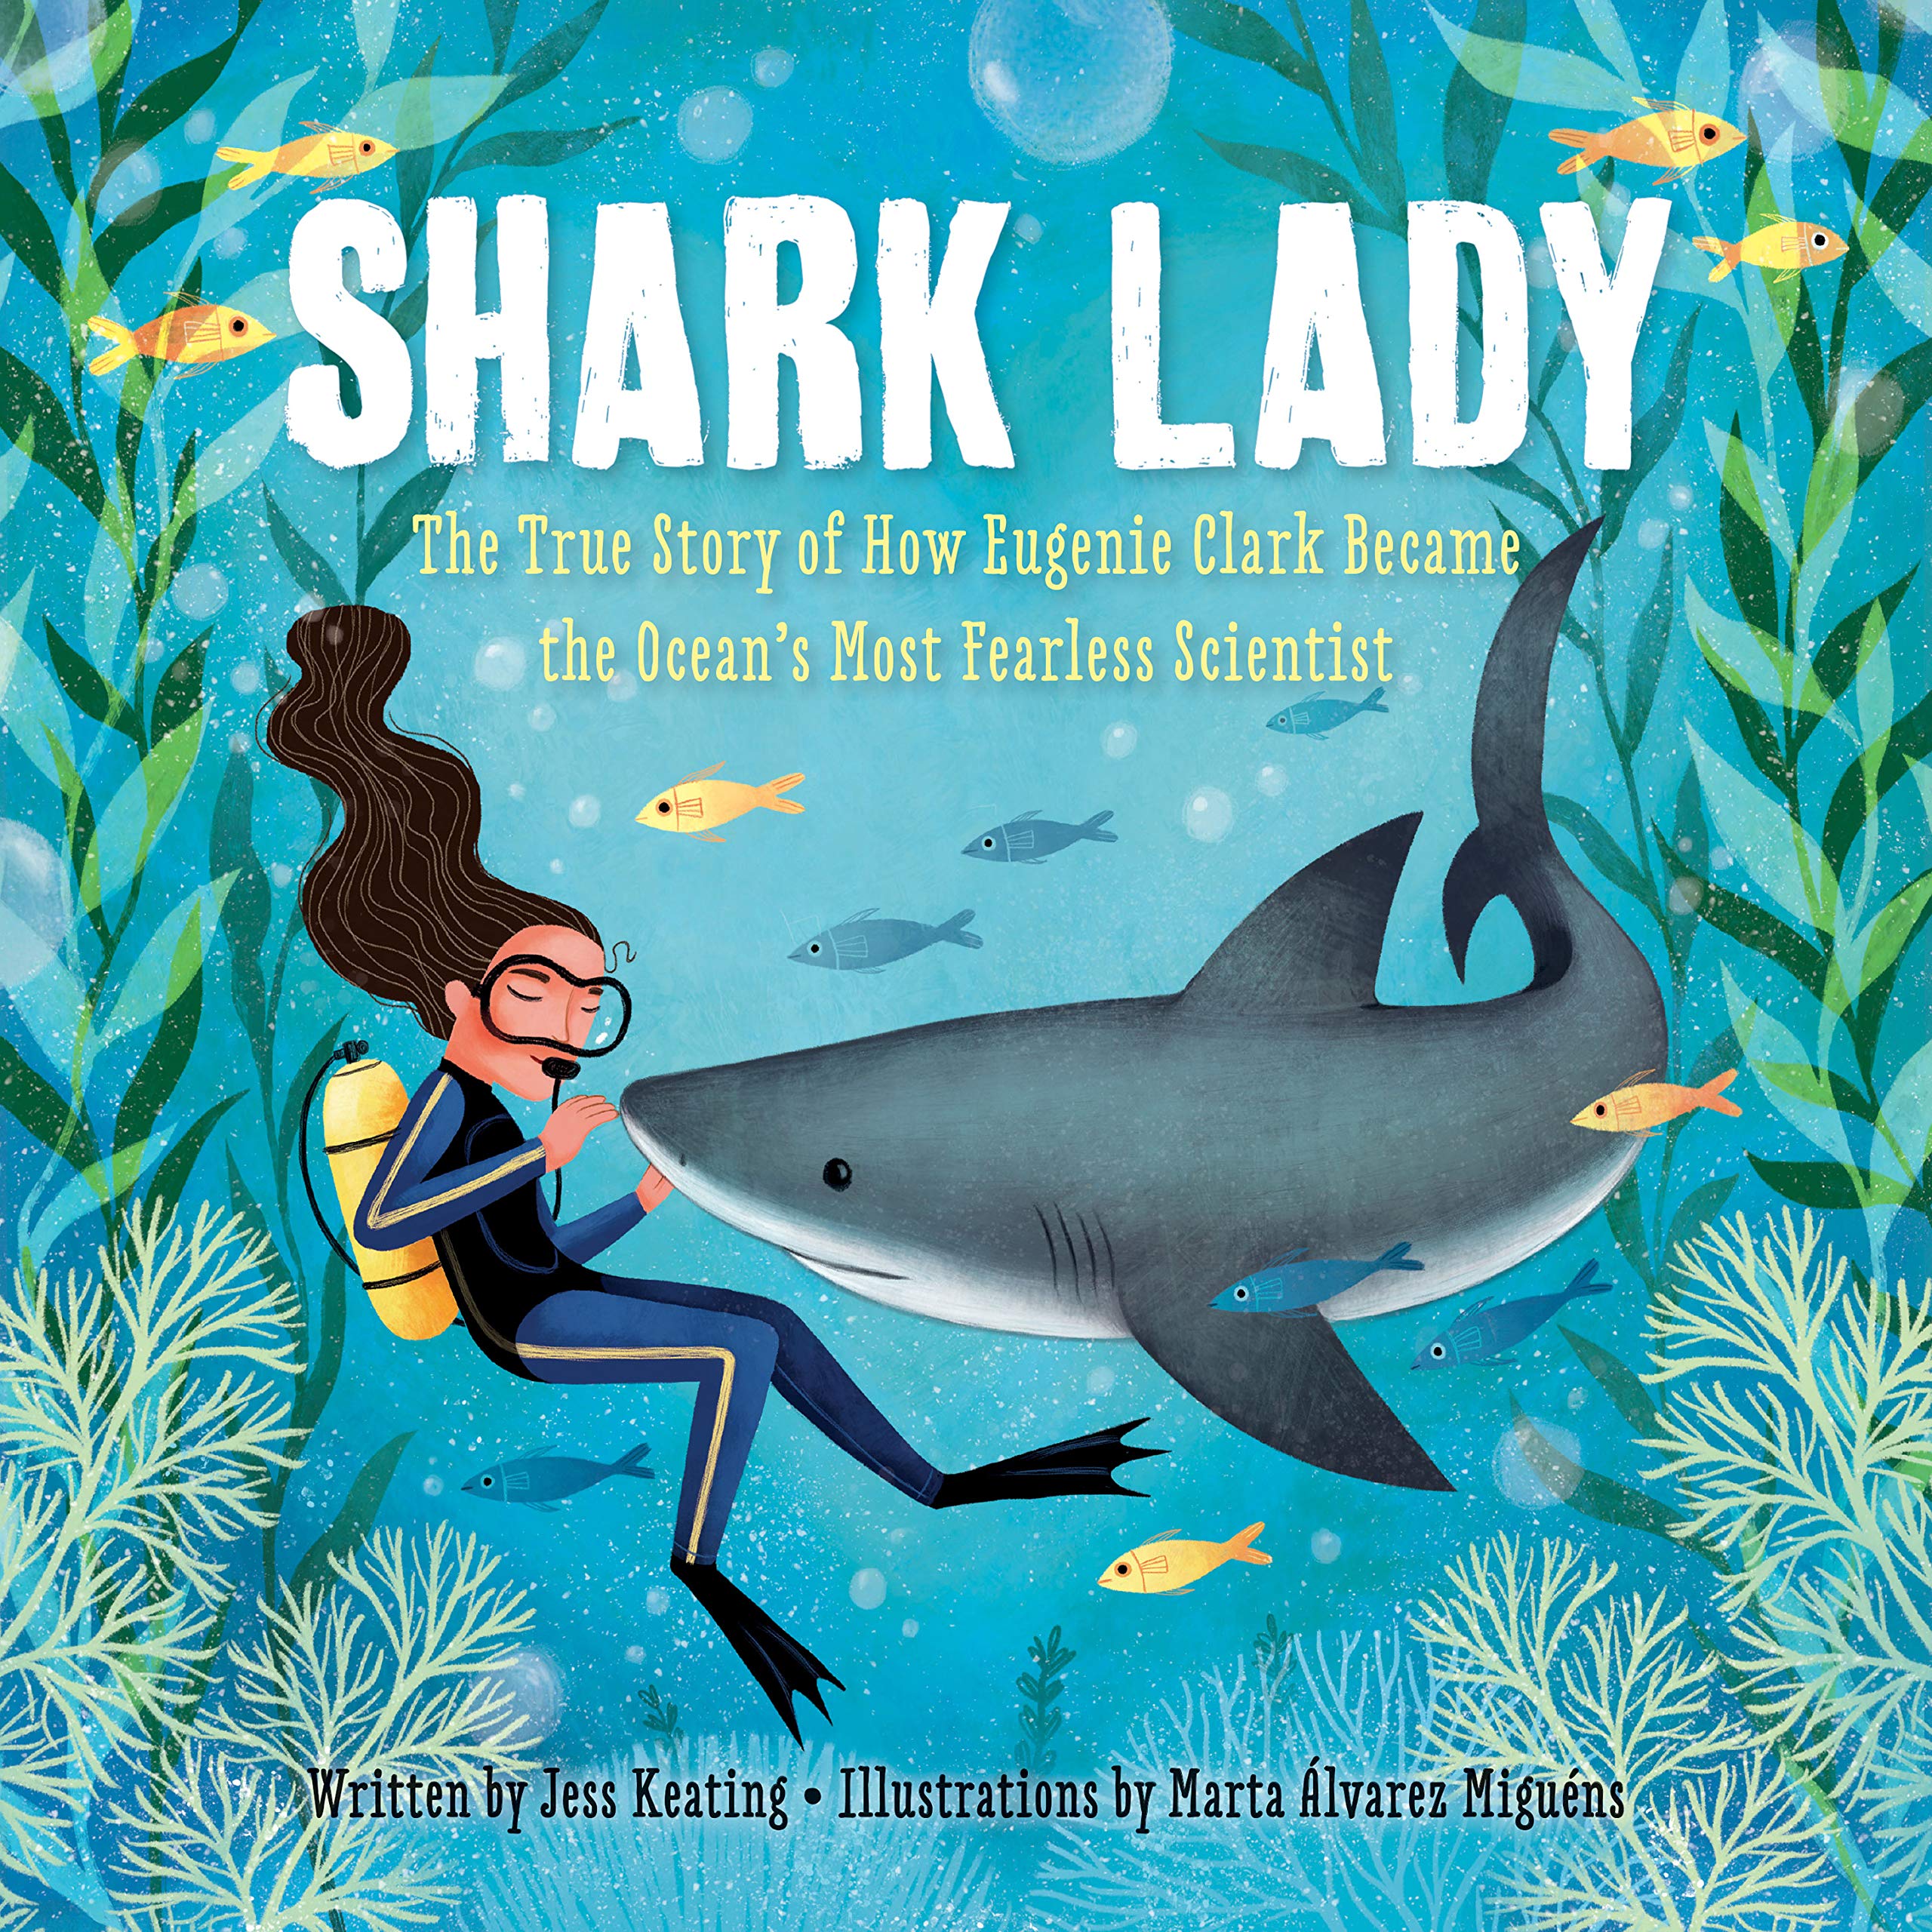 Image for "Shark Lady"